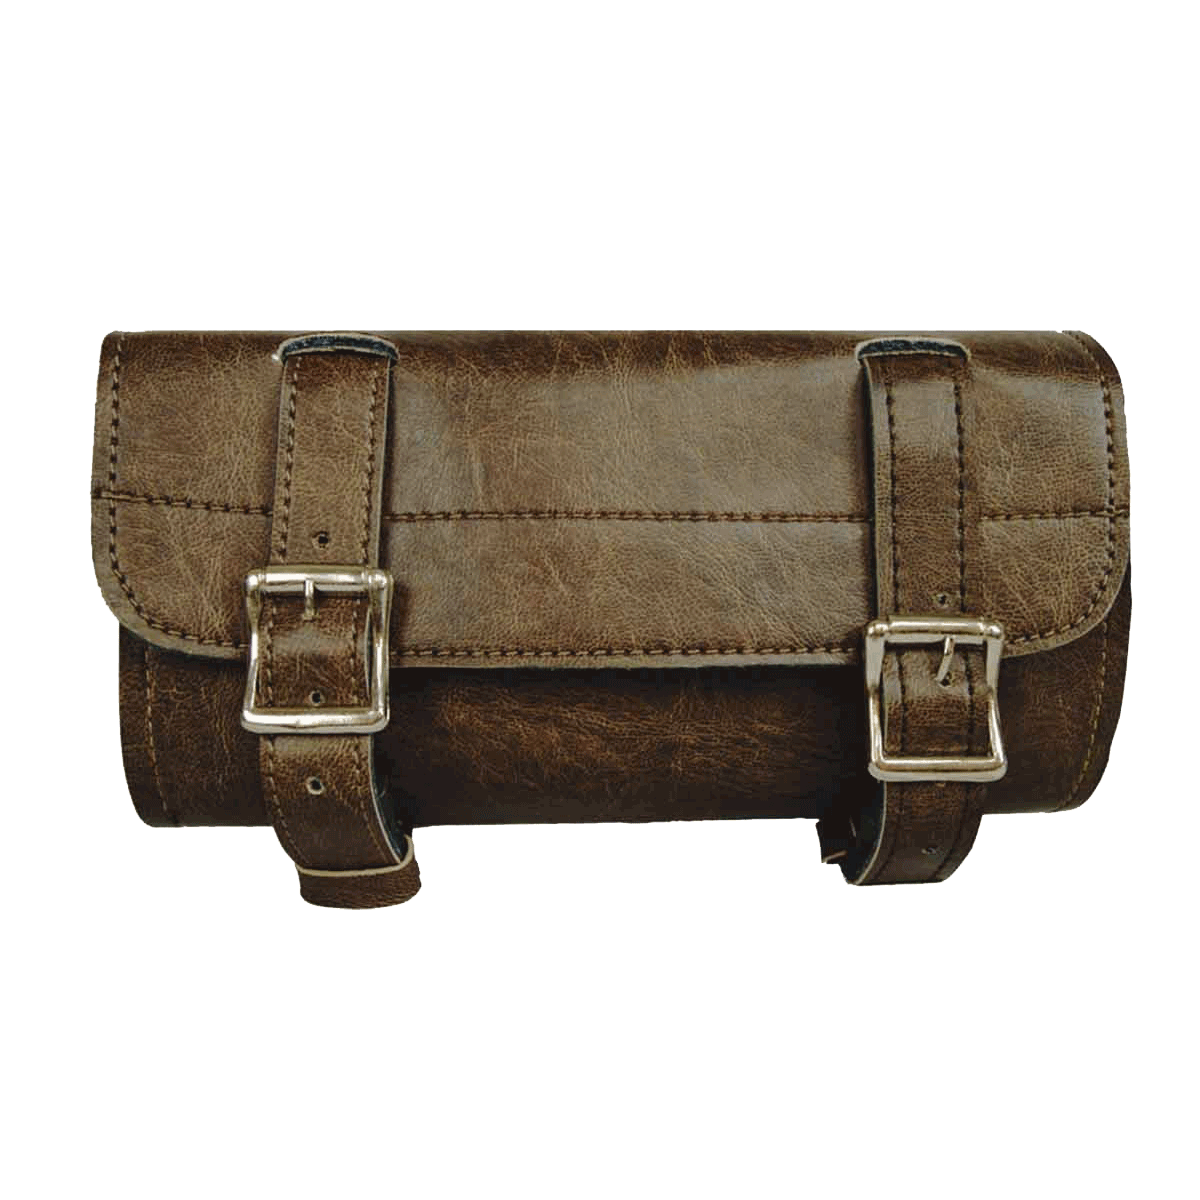 VS111DB Distressed Brown 2 Strap Plain Tool Bag with Quick Releases